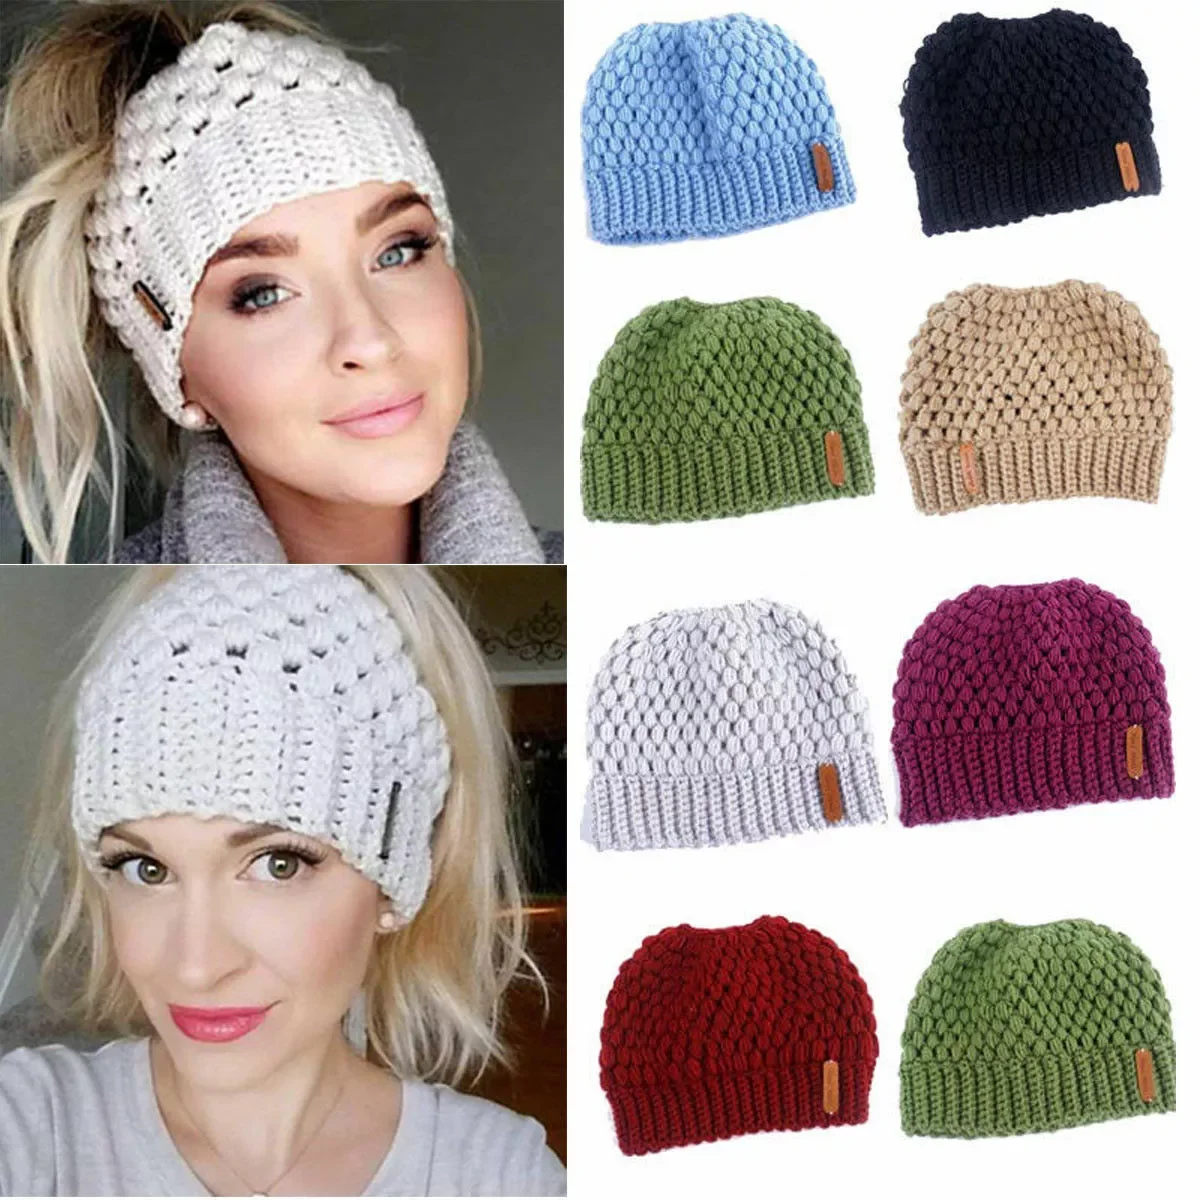 

Knitting Hats Winter Women Hat Ladies Girl Stretch Knit Hat With Tag Messy Bun Ponytail Beanie Holey Warm Hats Caps